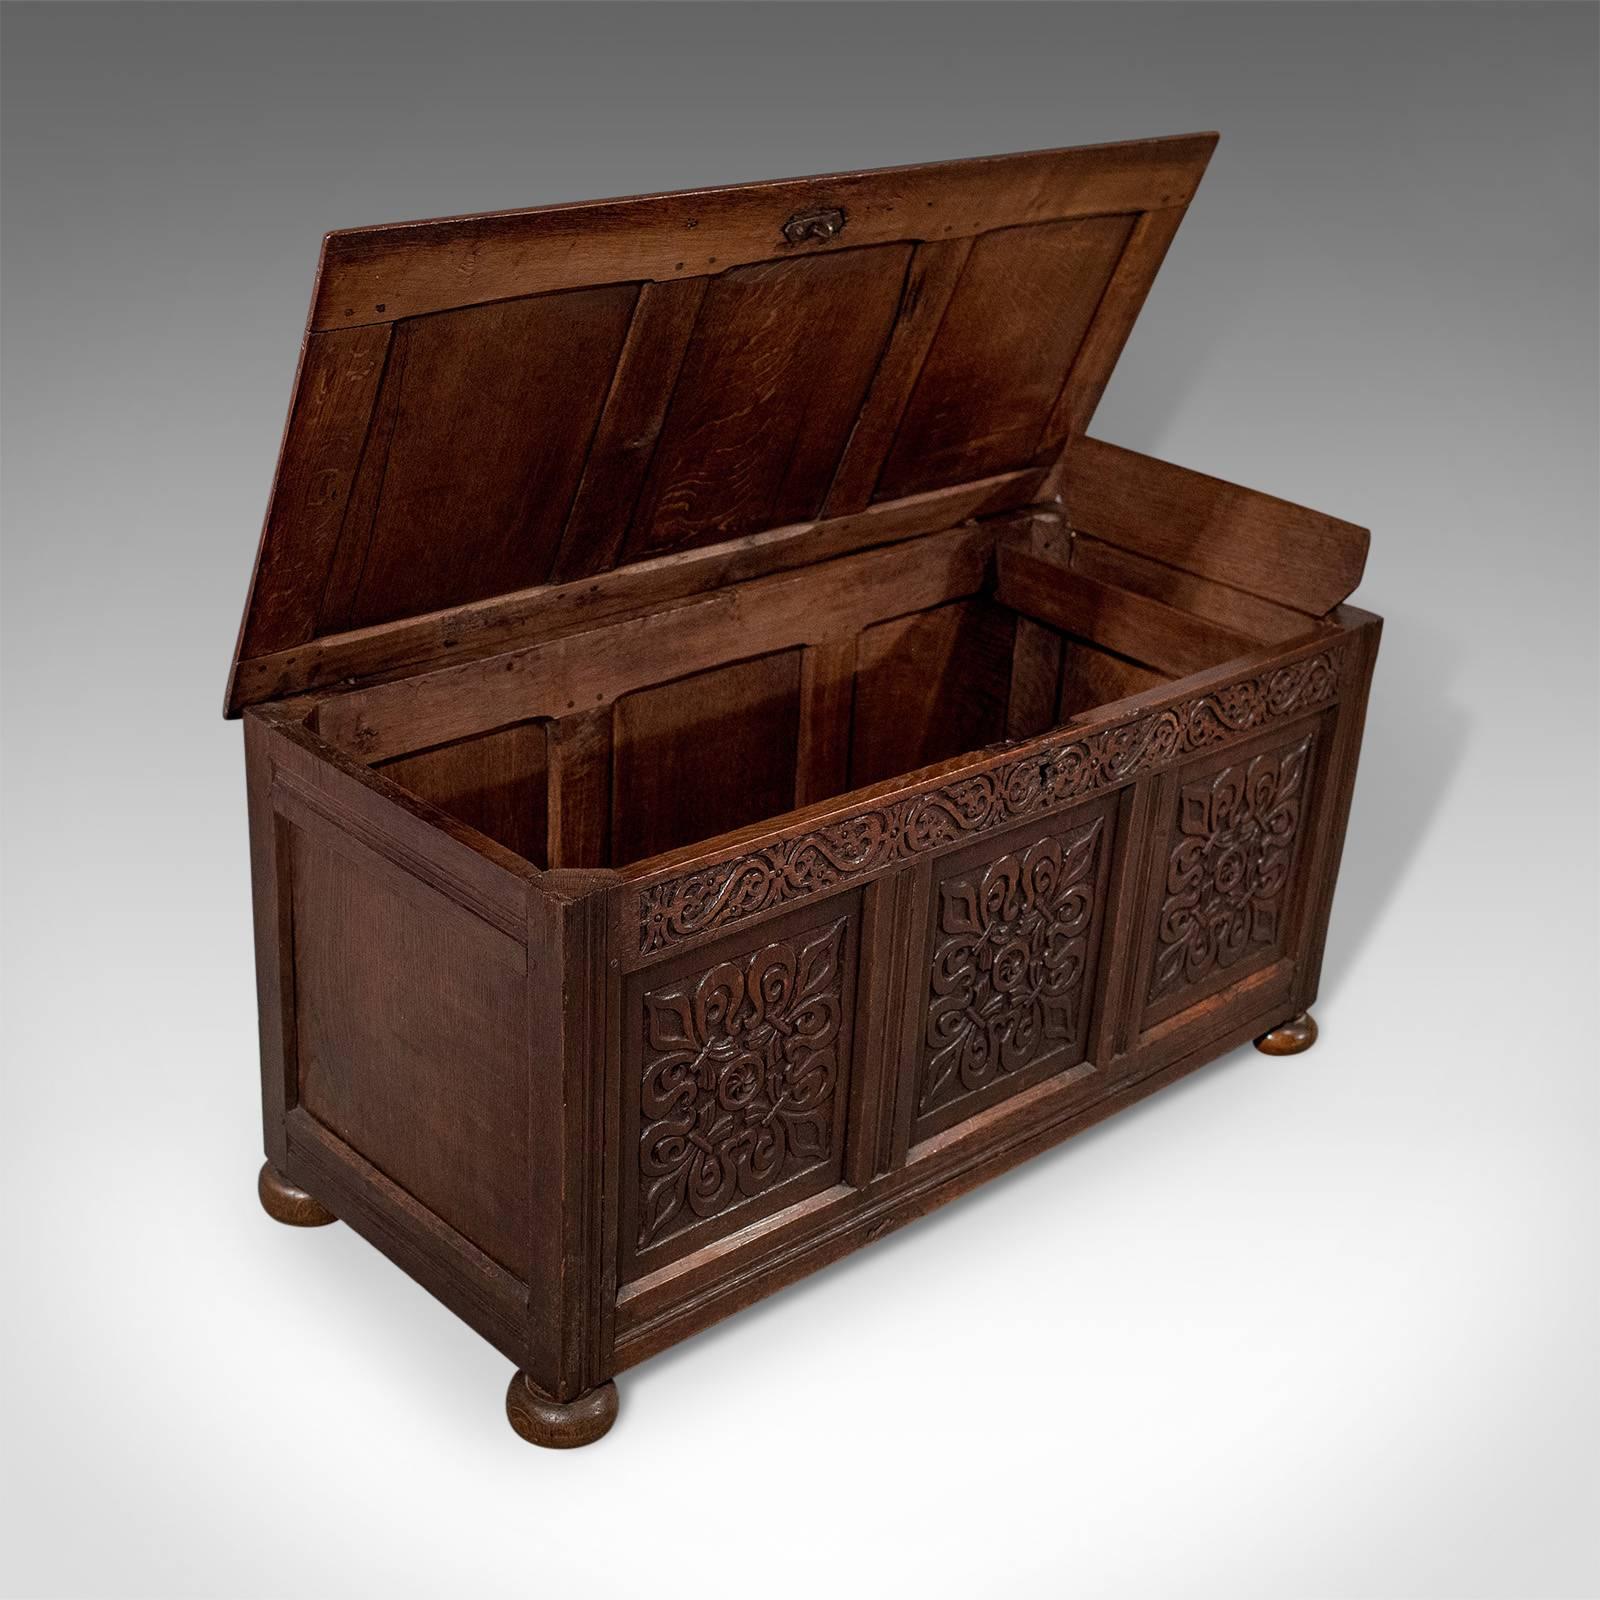 18th Century Antique Coffer, English Oak Joined Chest, Queen Anne, circa 1700